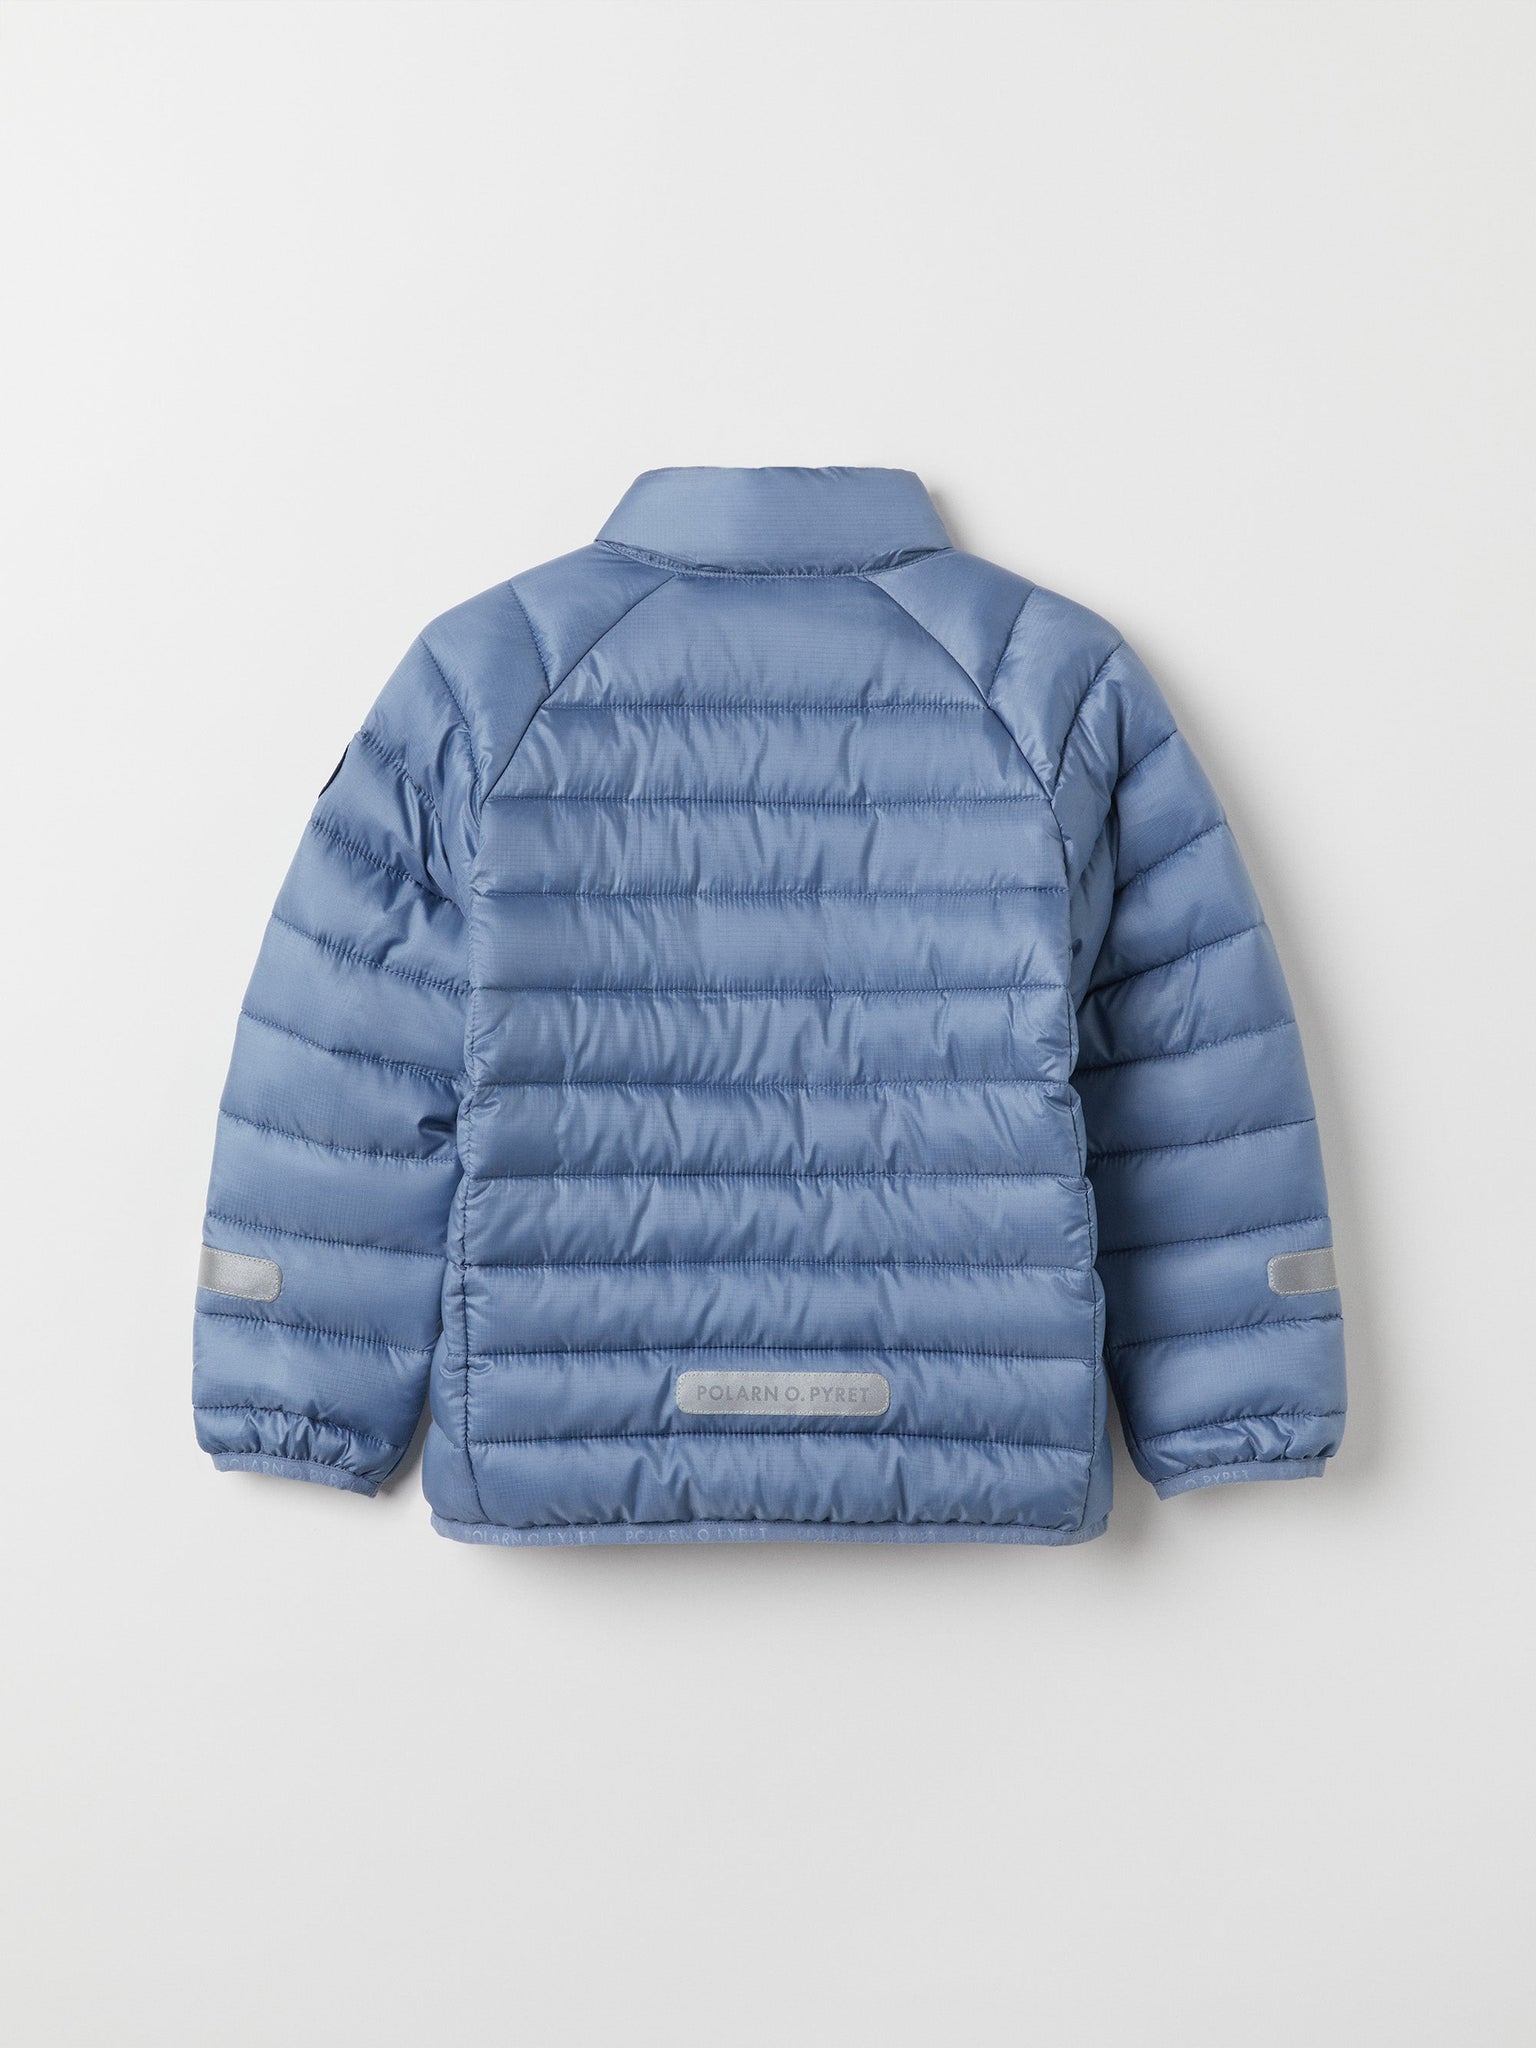 Water Resistant Blue Kids Puffer Jacker from the Polarn O. Pyret outerwear collection. Made using ethically sourced materials.